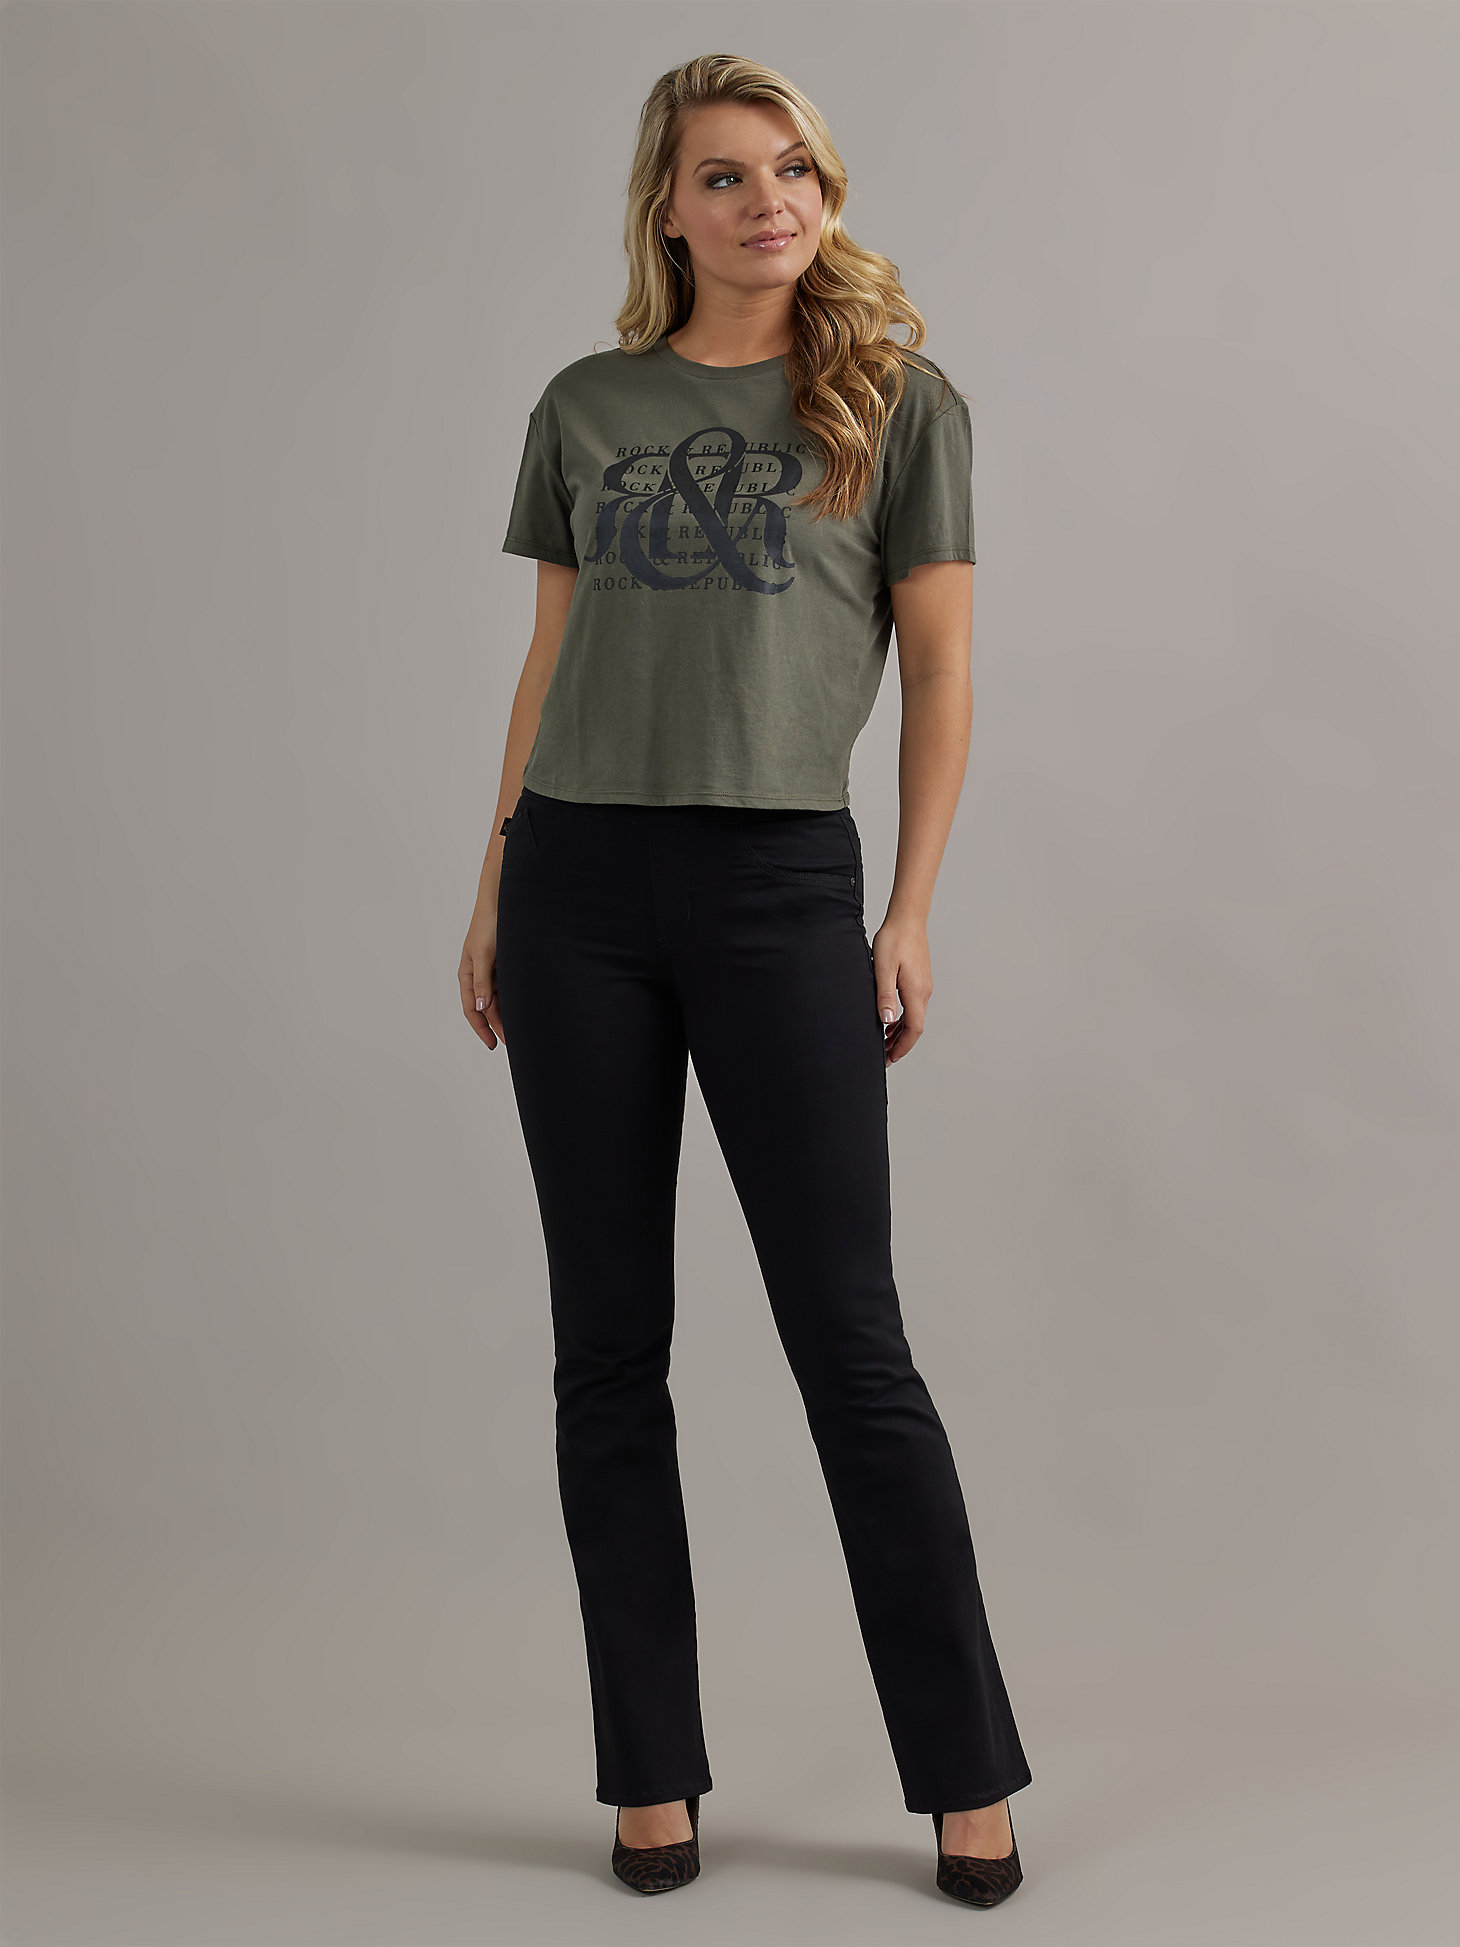 Short Sleeve Repeat Logo Tee in Olive main view